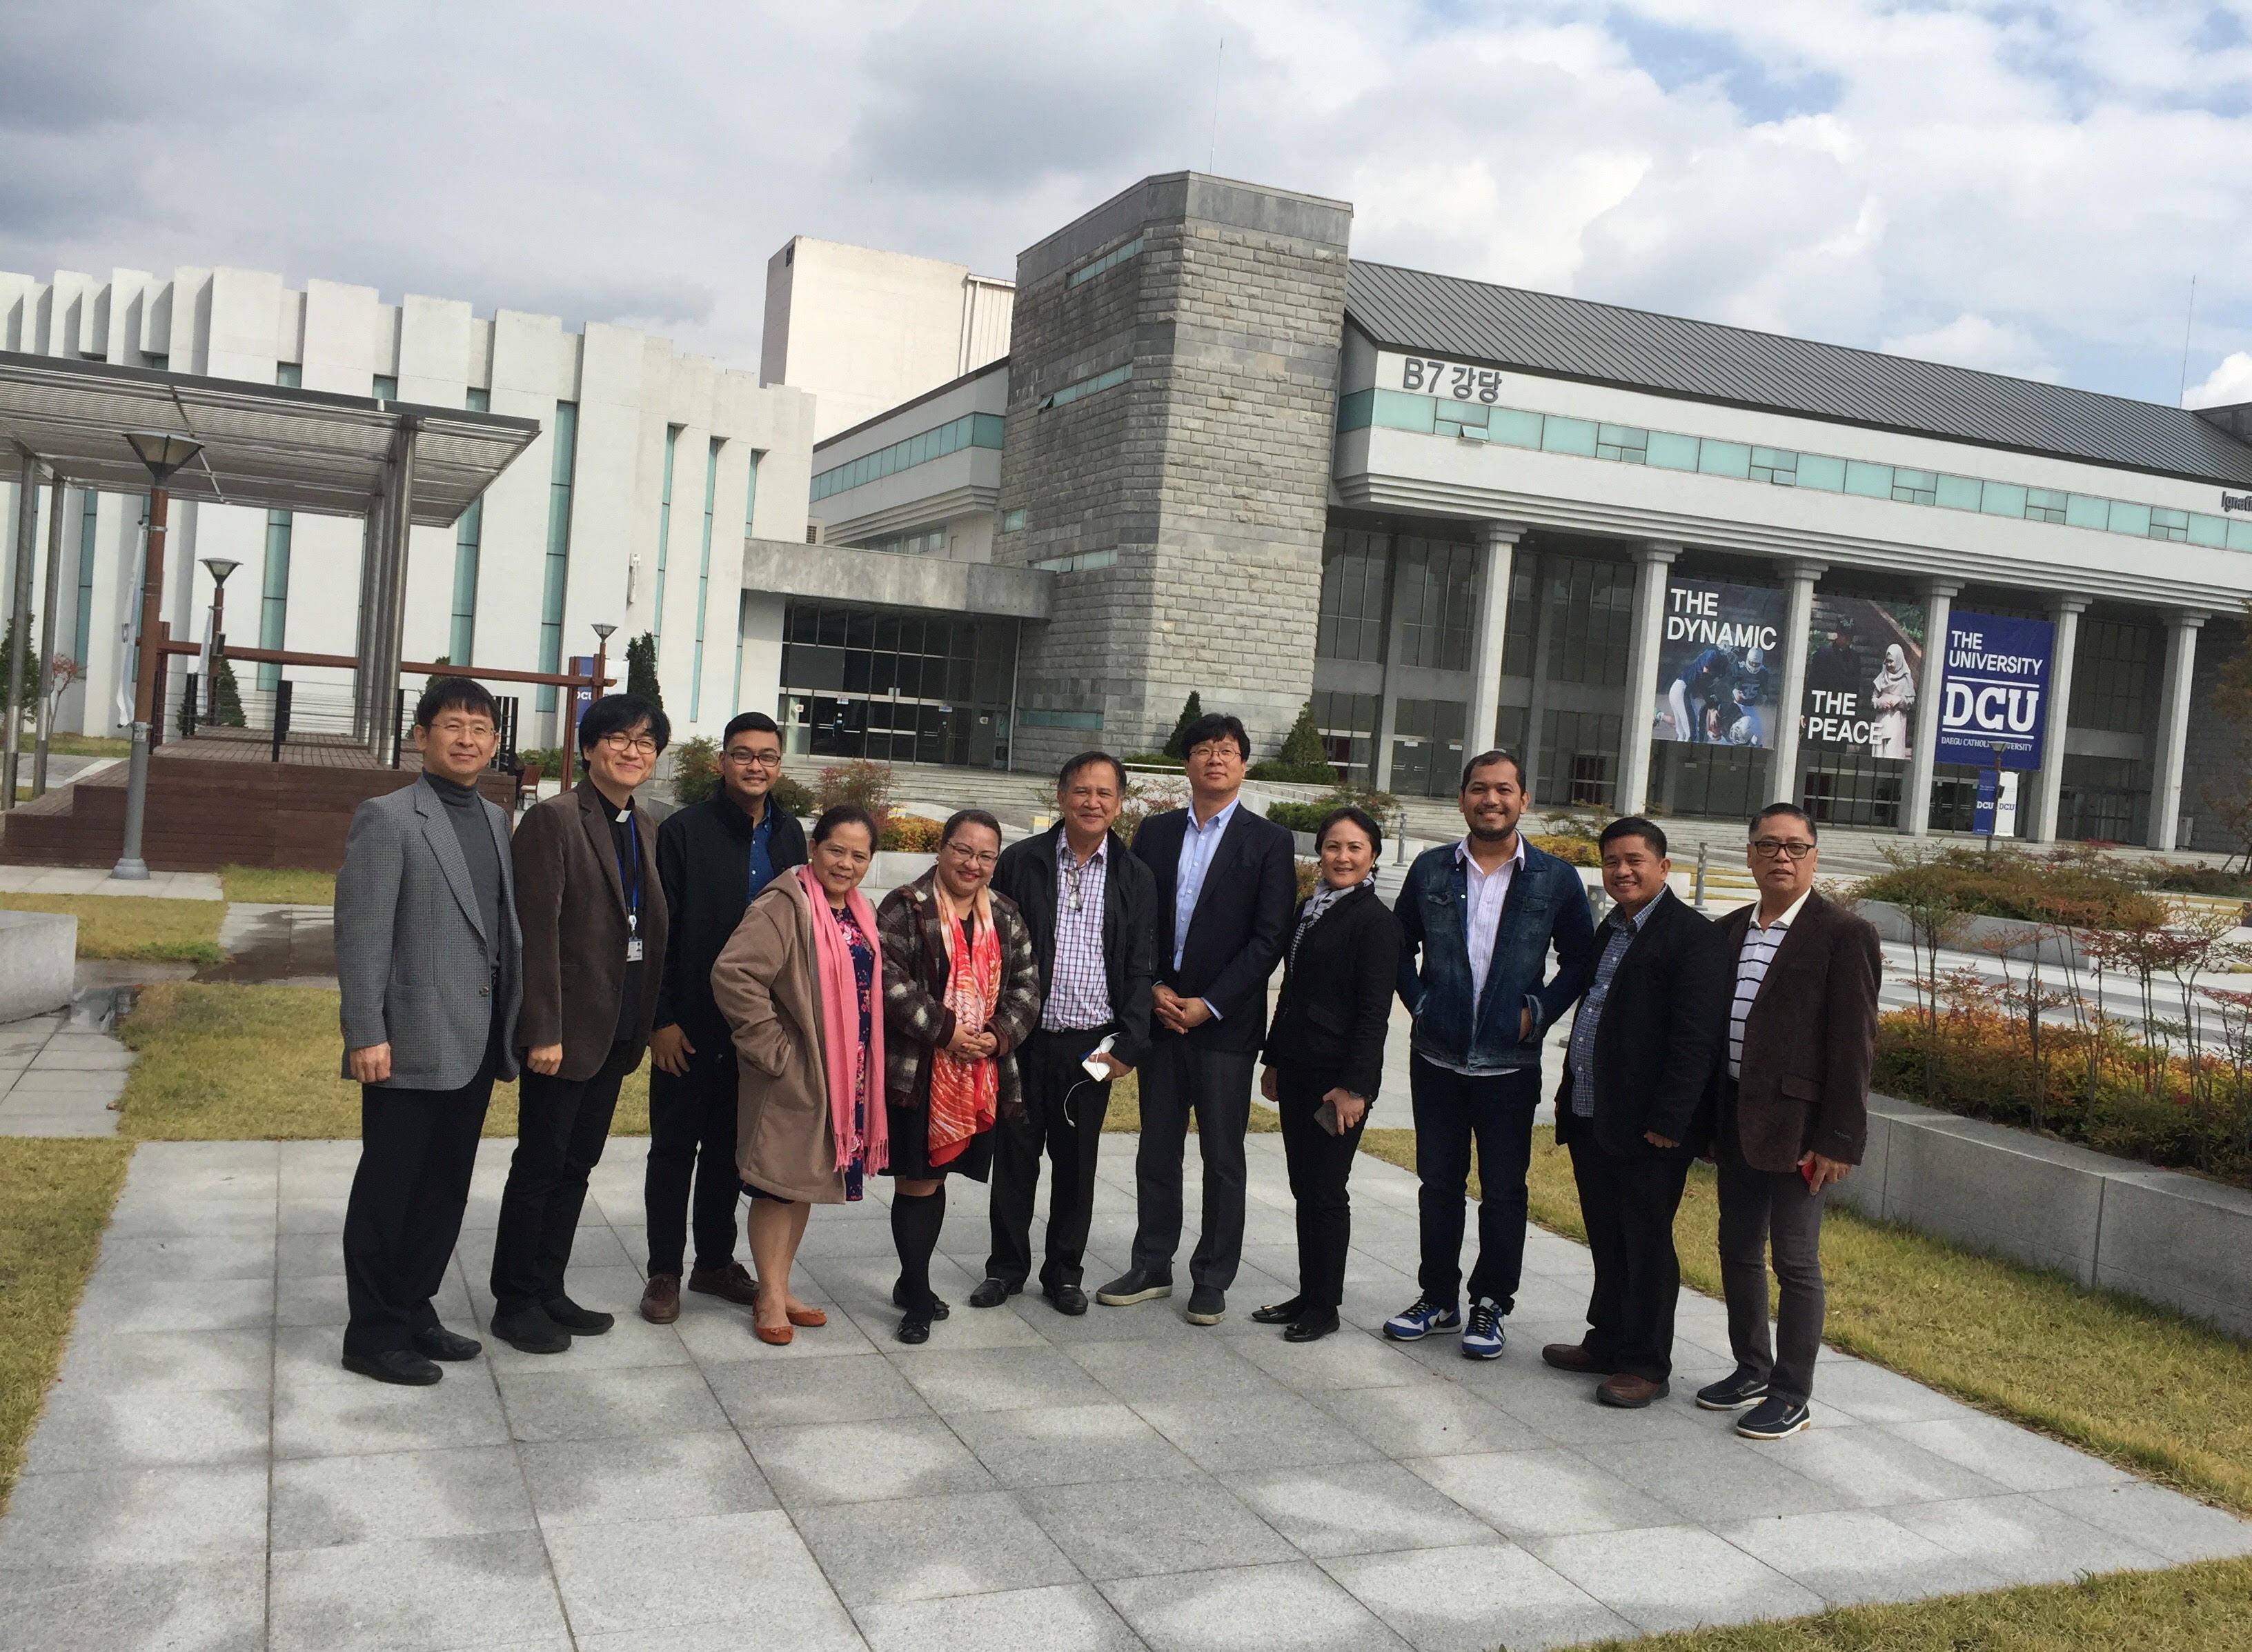 Dean of Students Joins Study Visit, Benchmarking in Seoul